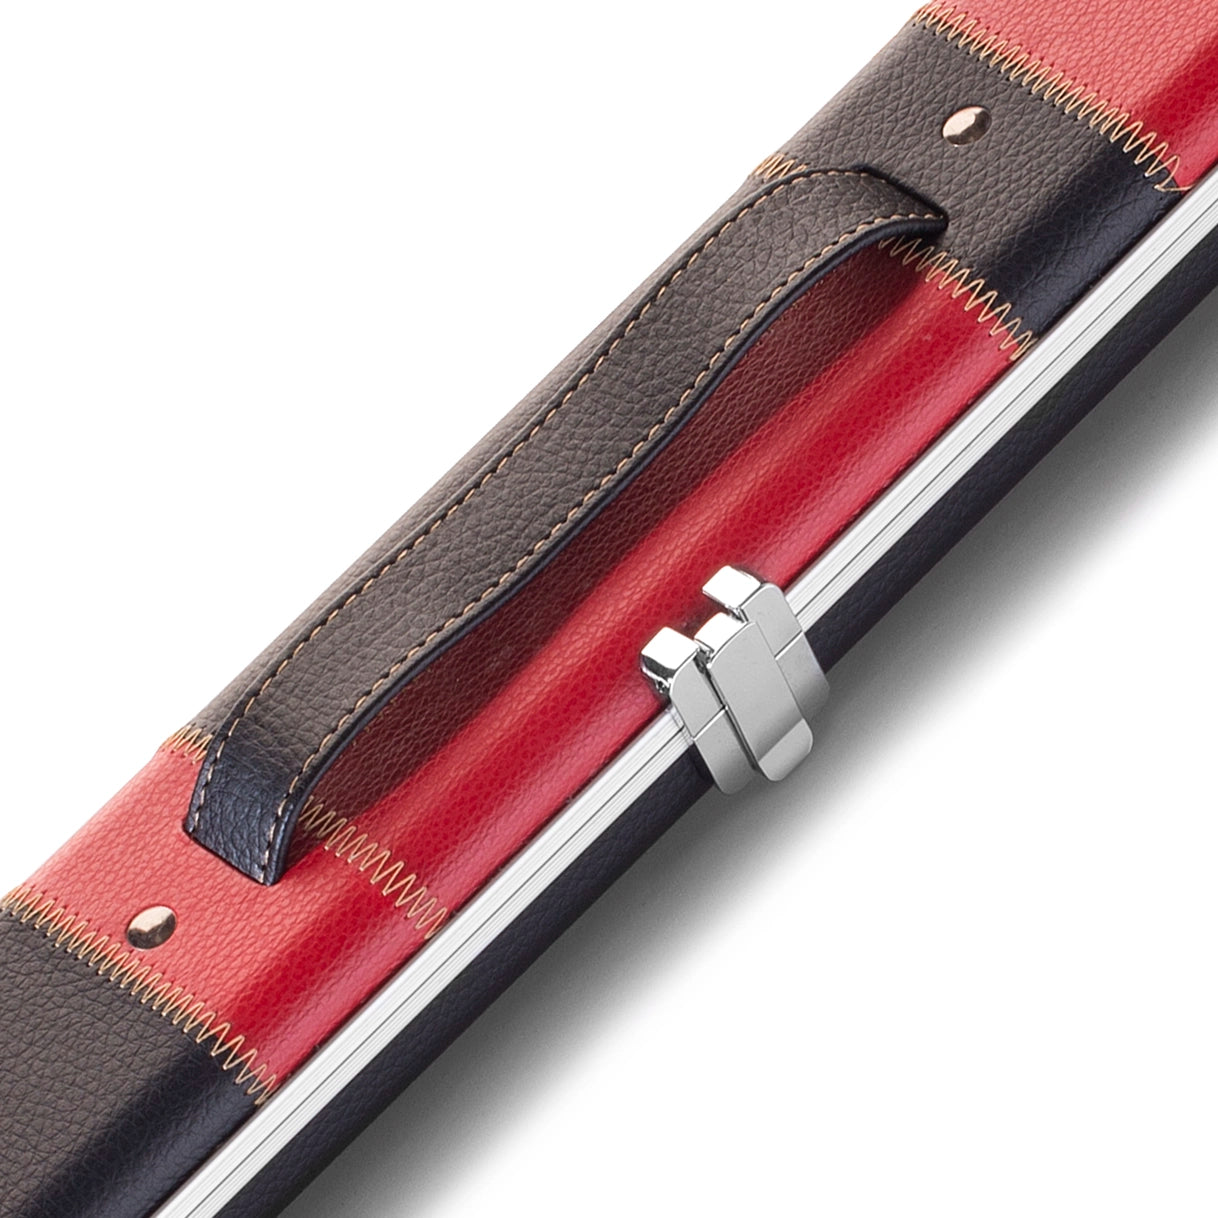 Peradon Black Red Patch Halo Case for 3/4 Cues. Close up view